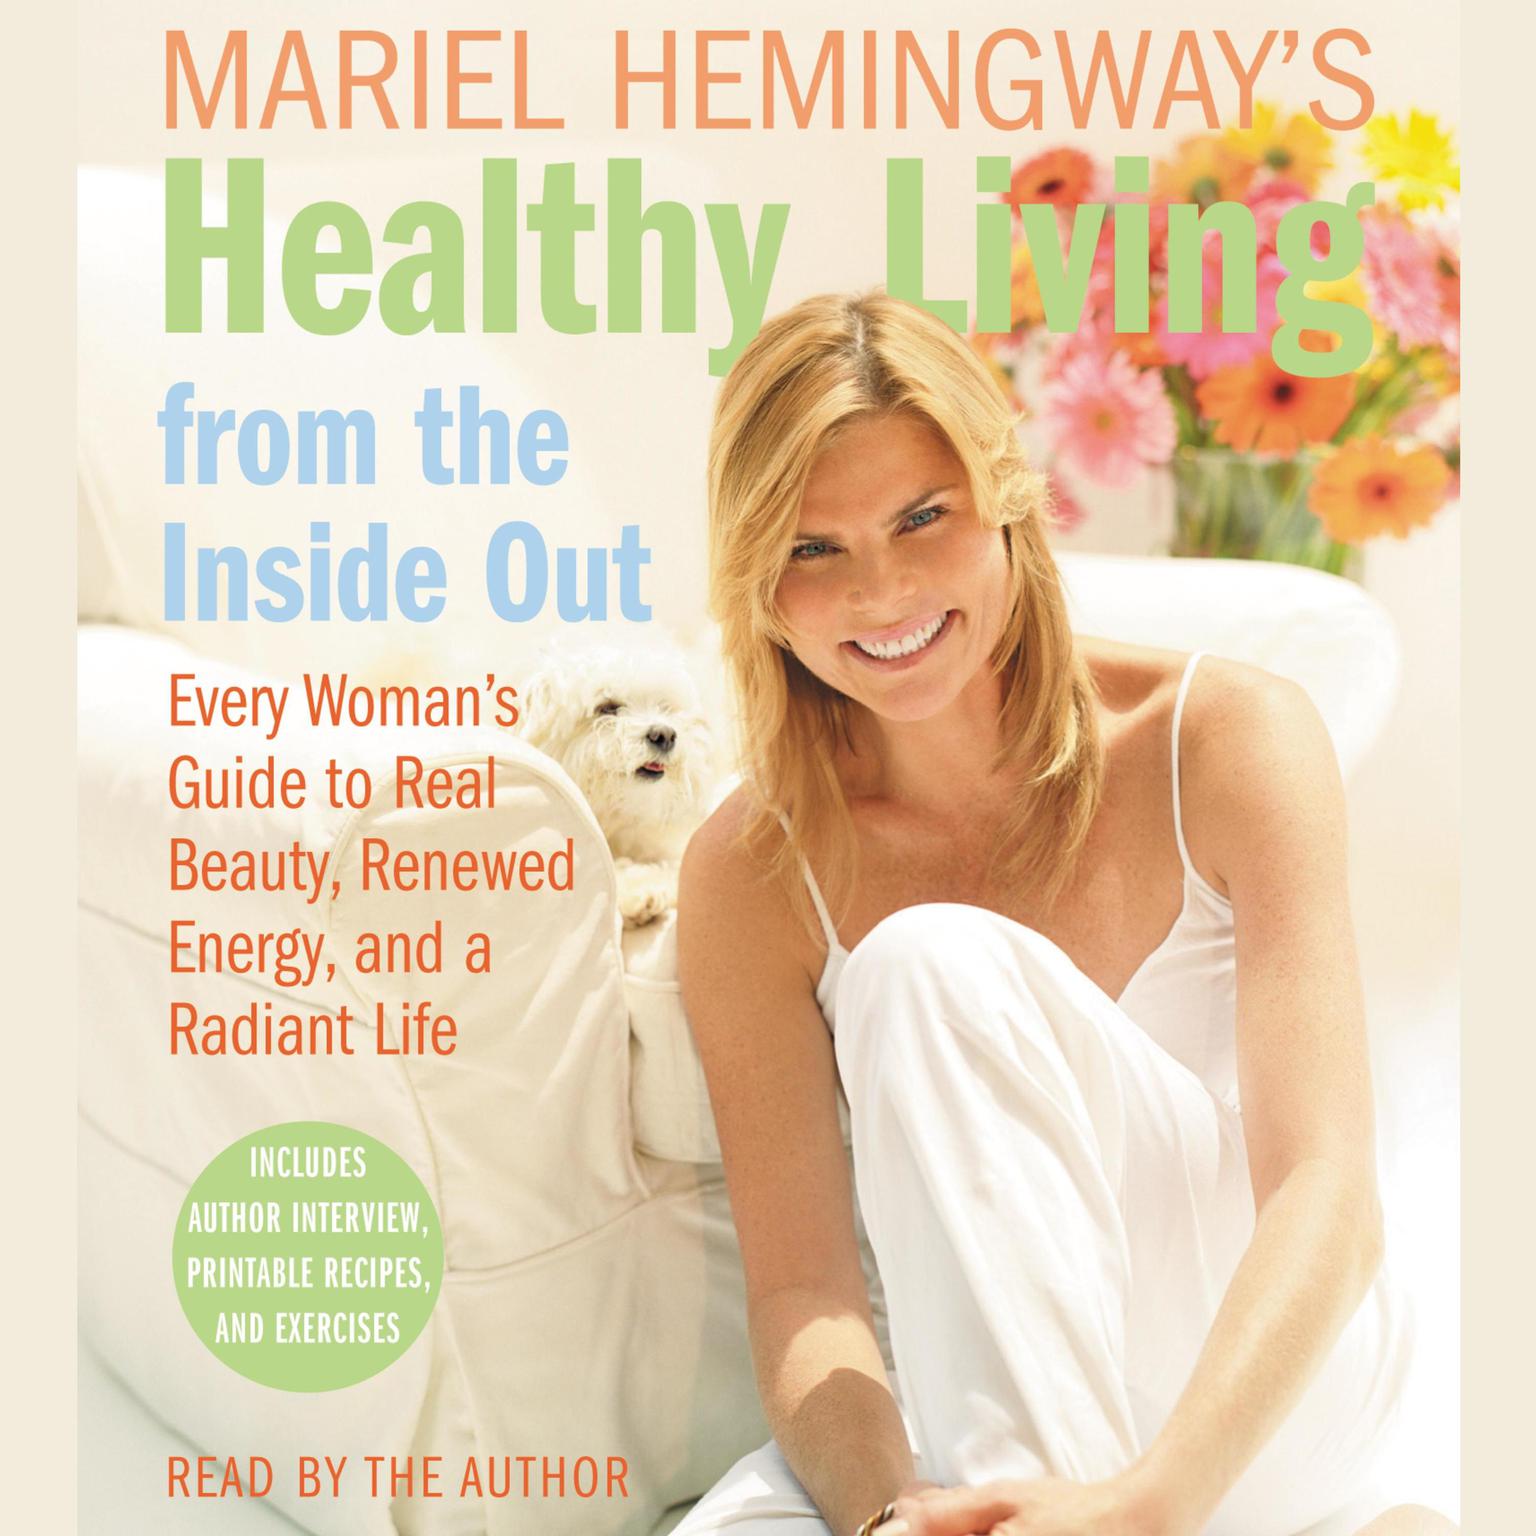 Mariel Hemingways Healthy Living from the Inside Out (Abridged): Every Woman’s Guide to Real Beauty, Renewed Energy, and a Radiant Life Audiobook, by Mariel Hemingway